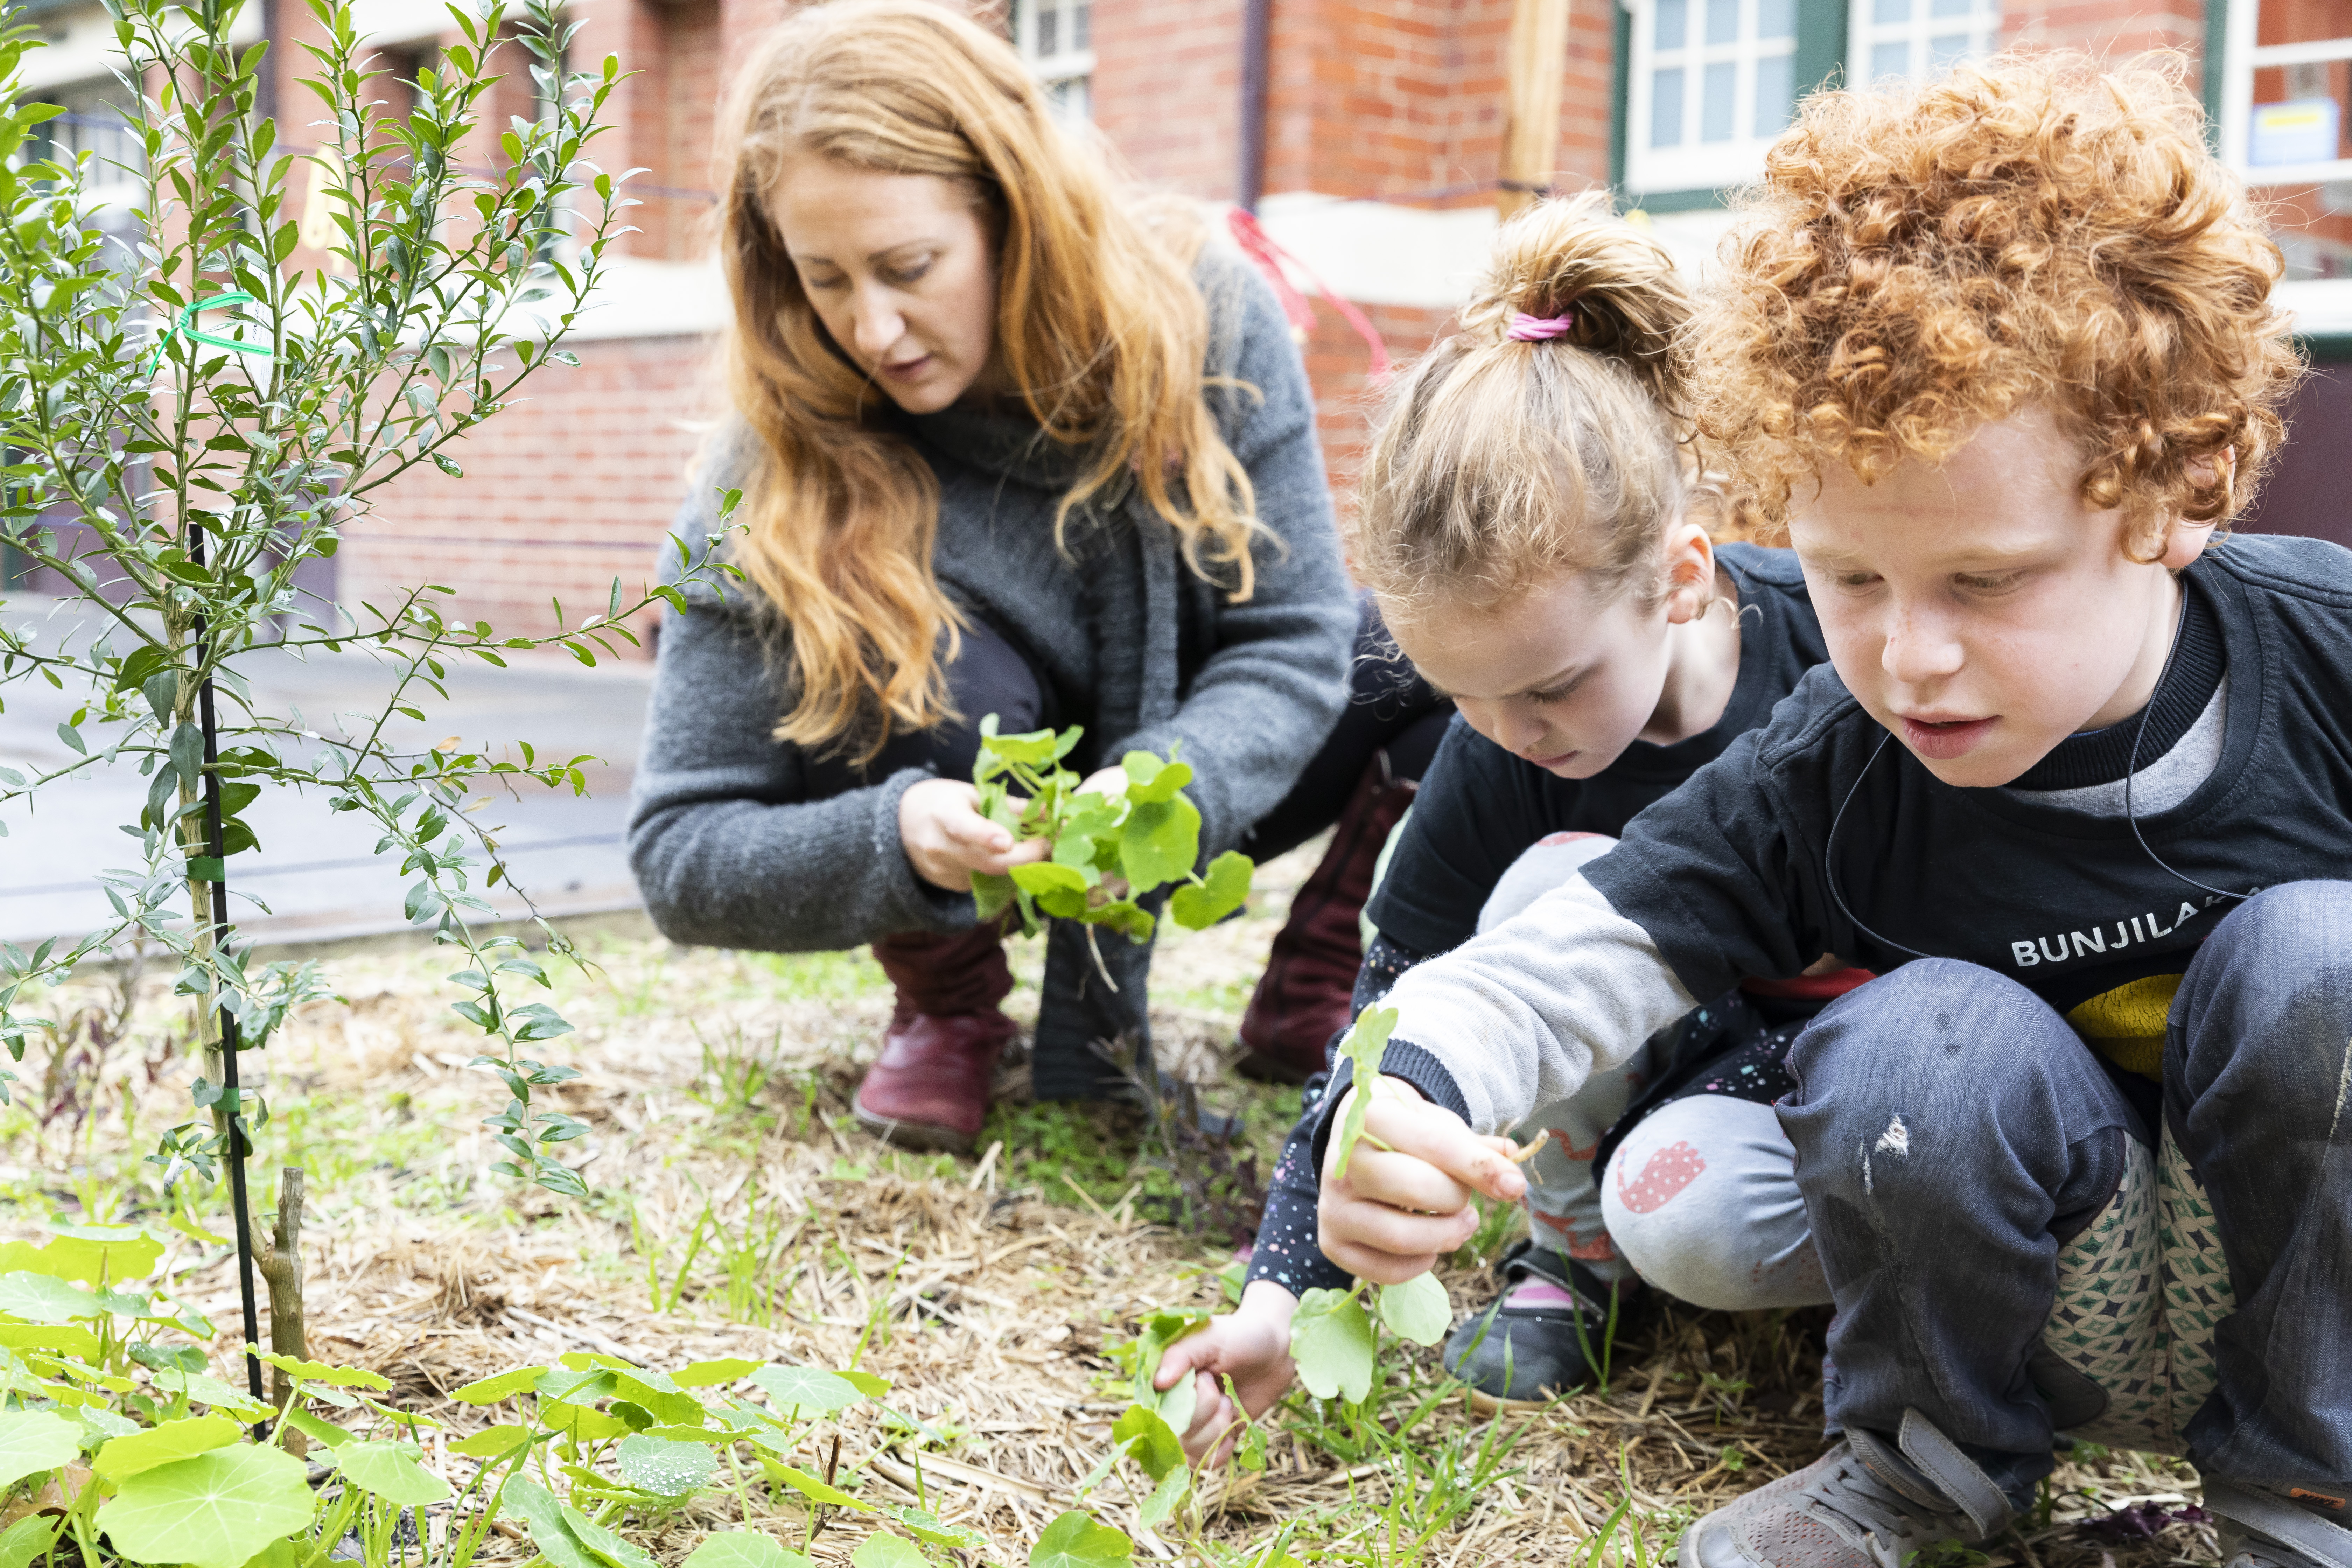 One adult and two children planting plants